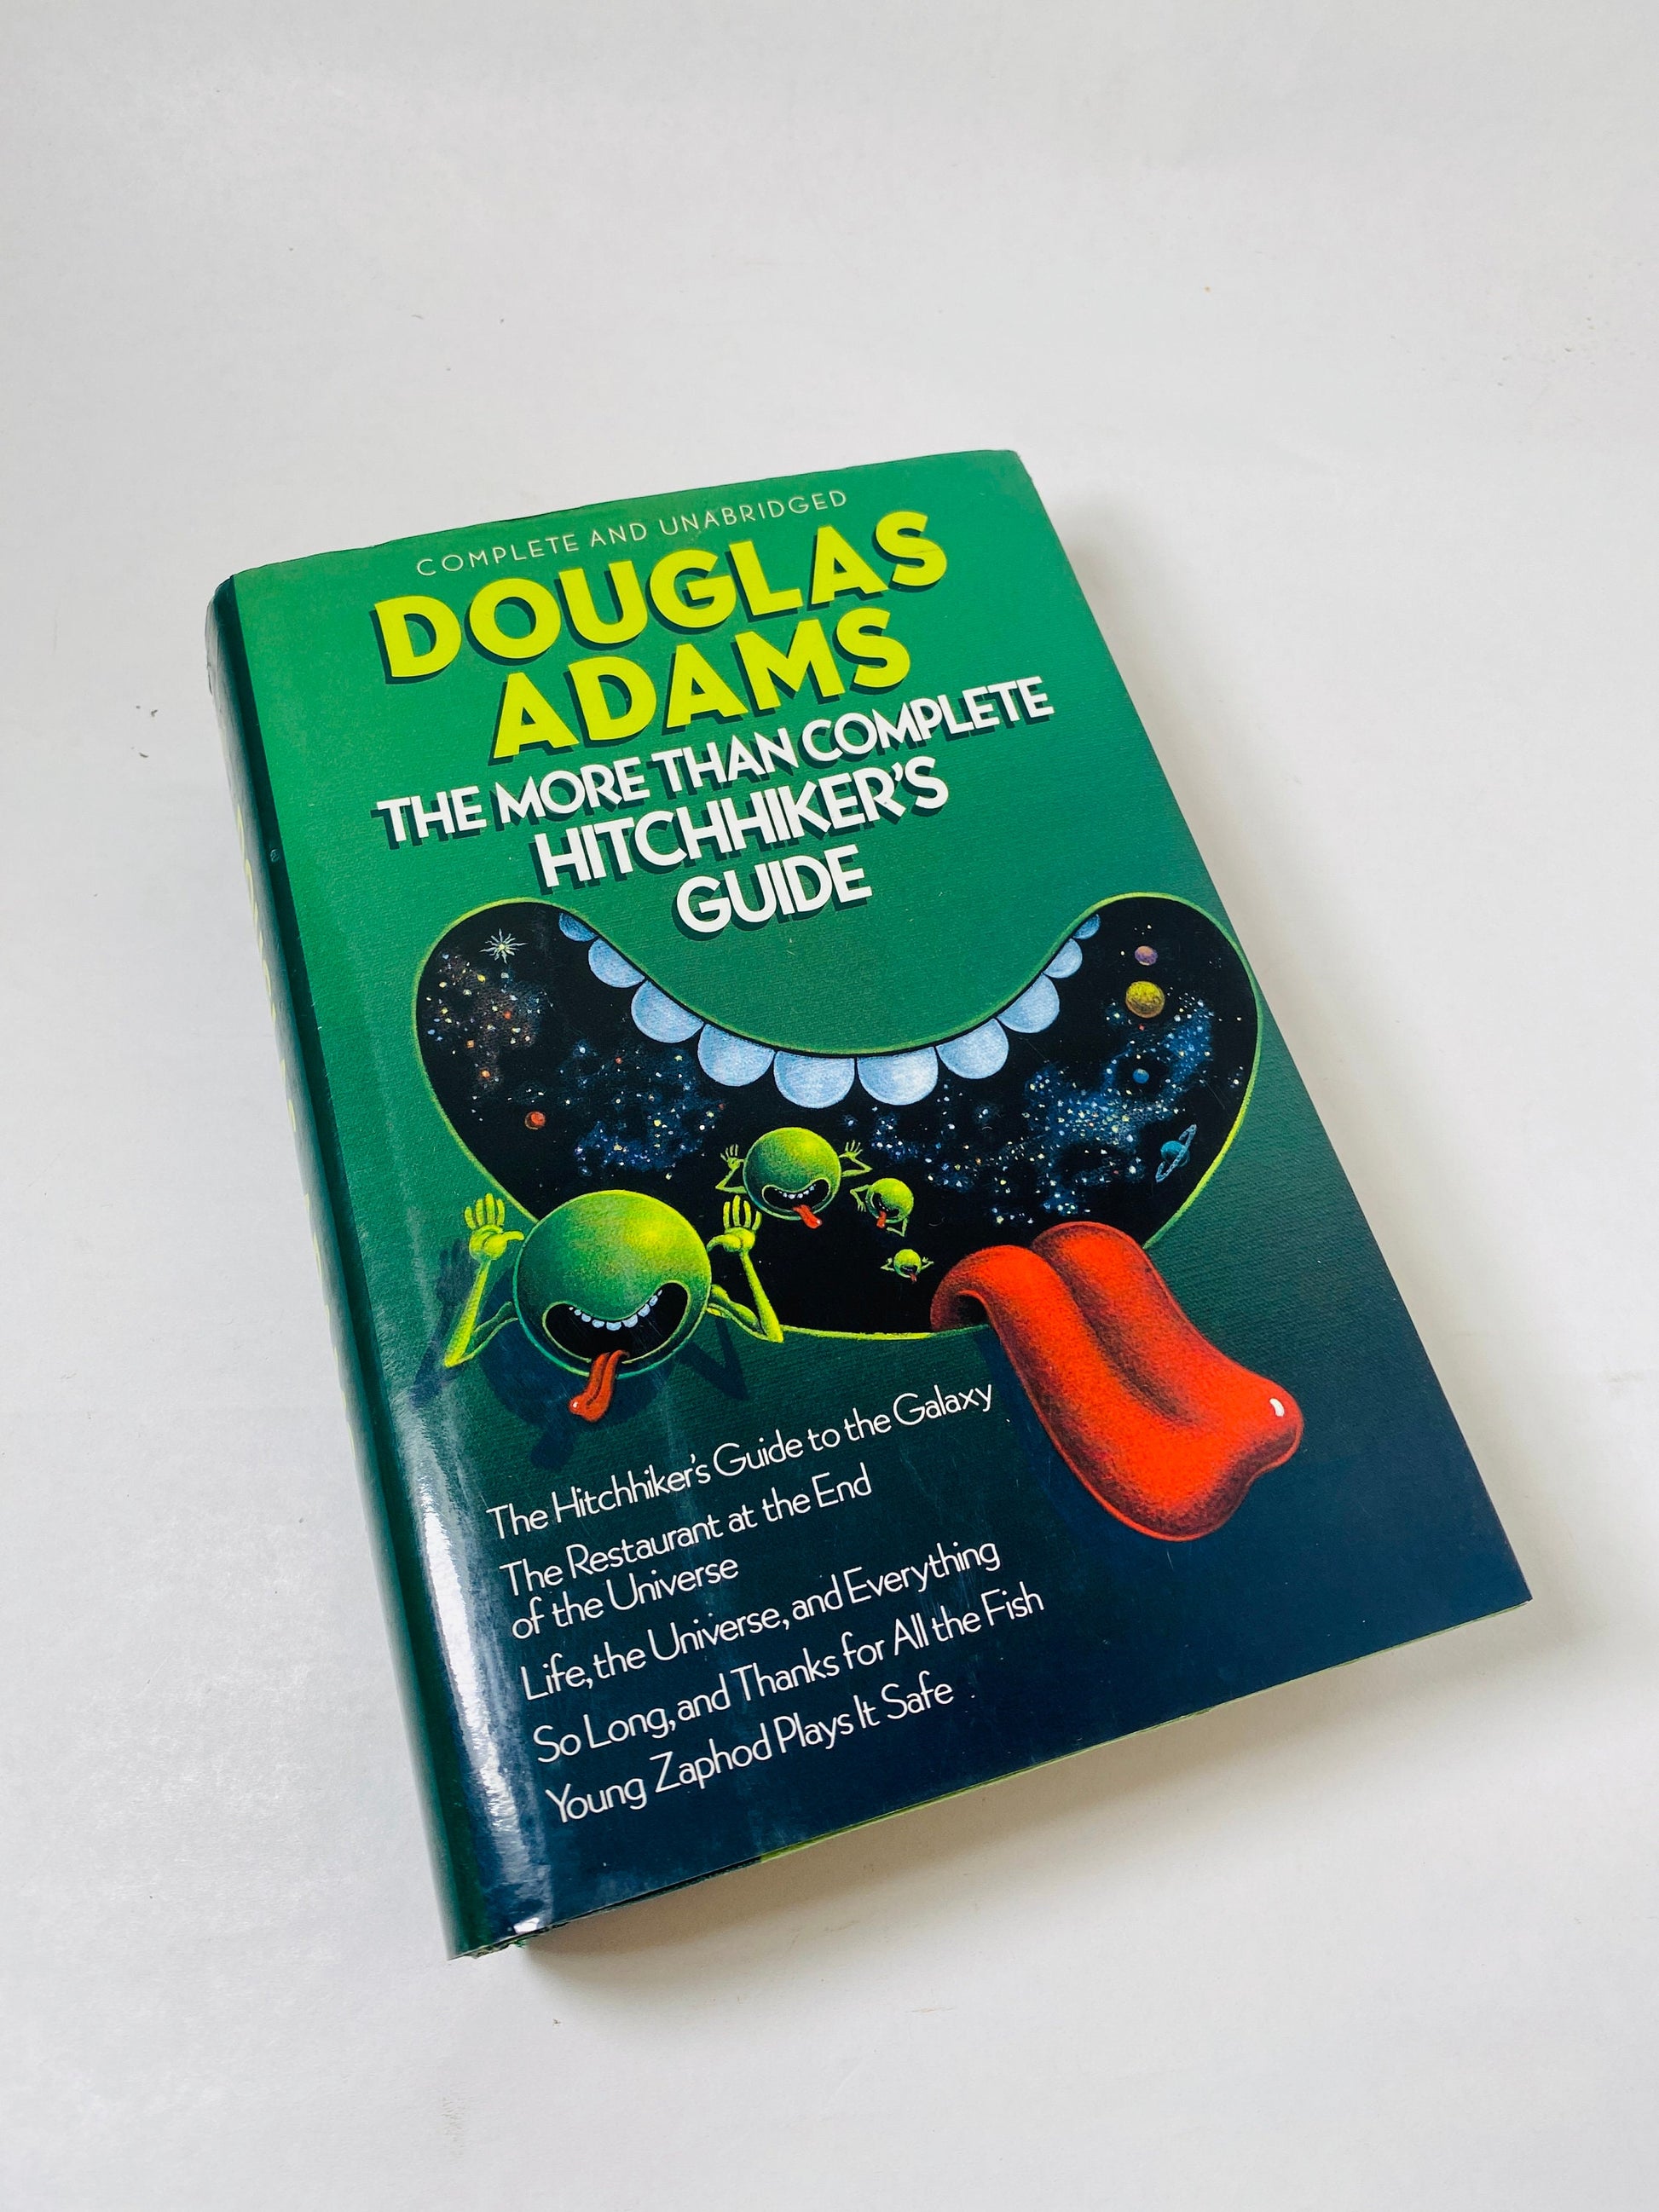 Hitchhikers Guide to the Galaxy Douglas Adams vintage book circa 1989. Complete and Unabridged. A Trilogy in Five Parts HG2G gift